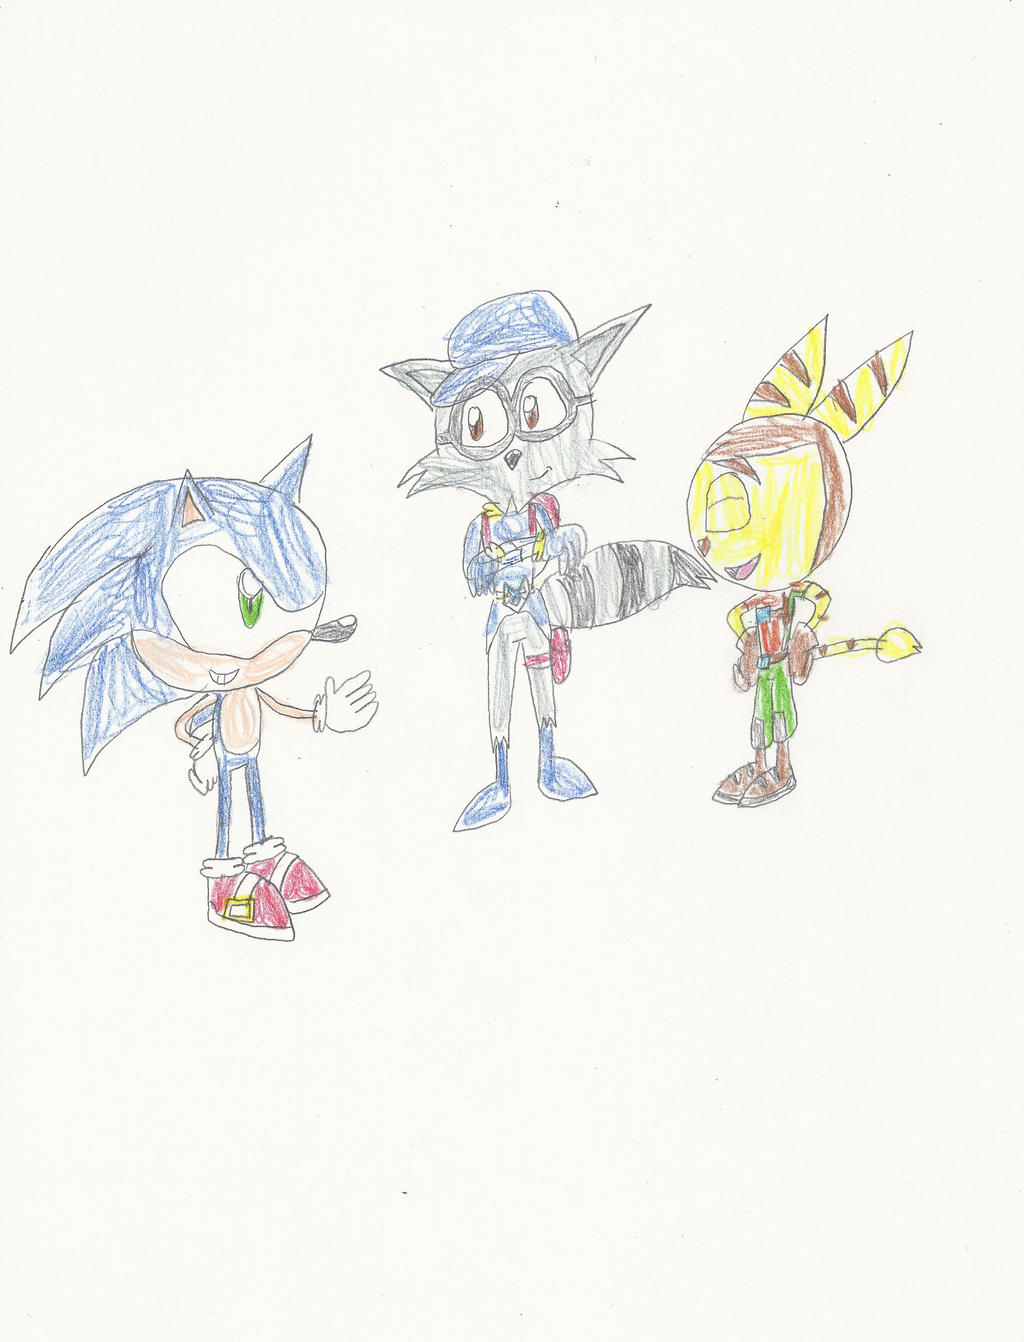 Sonic, Sly and Ratchet chatting